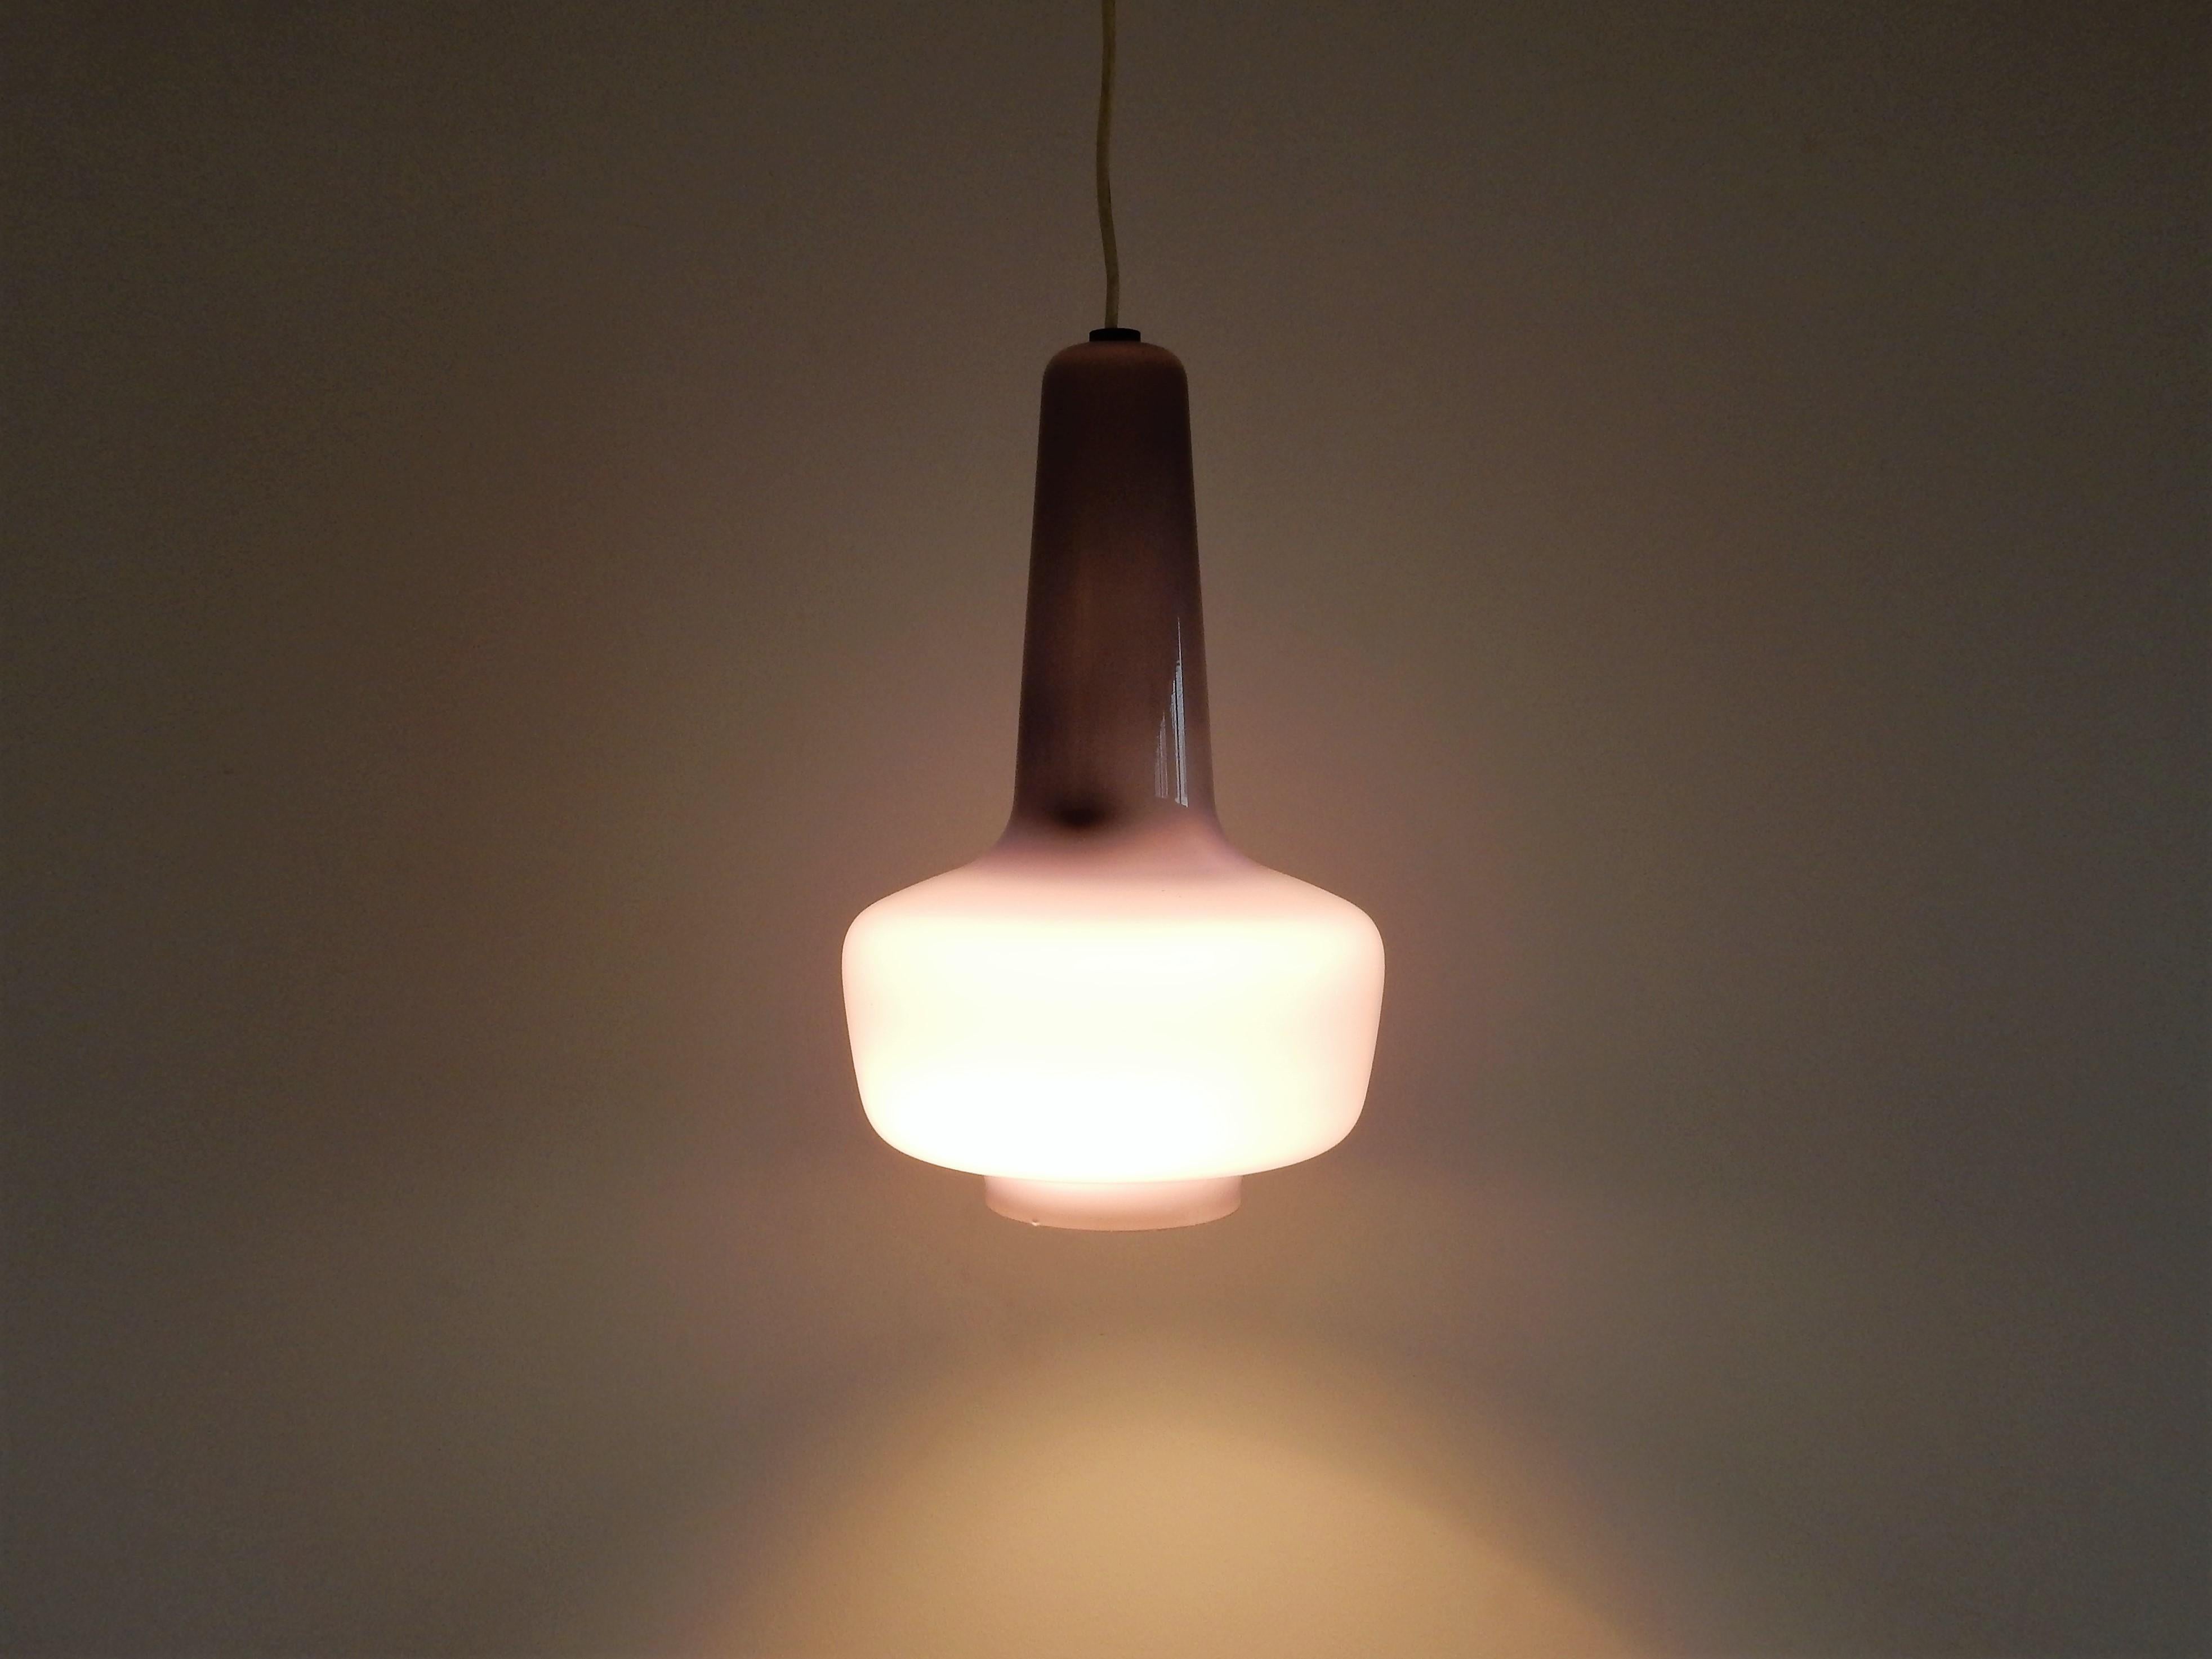 Purple 'Kreta' Pendant Lamp by Jacob Eiler Bang for Fog & Mørup In Good Condition For Sale In Steenwijk, NL